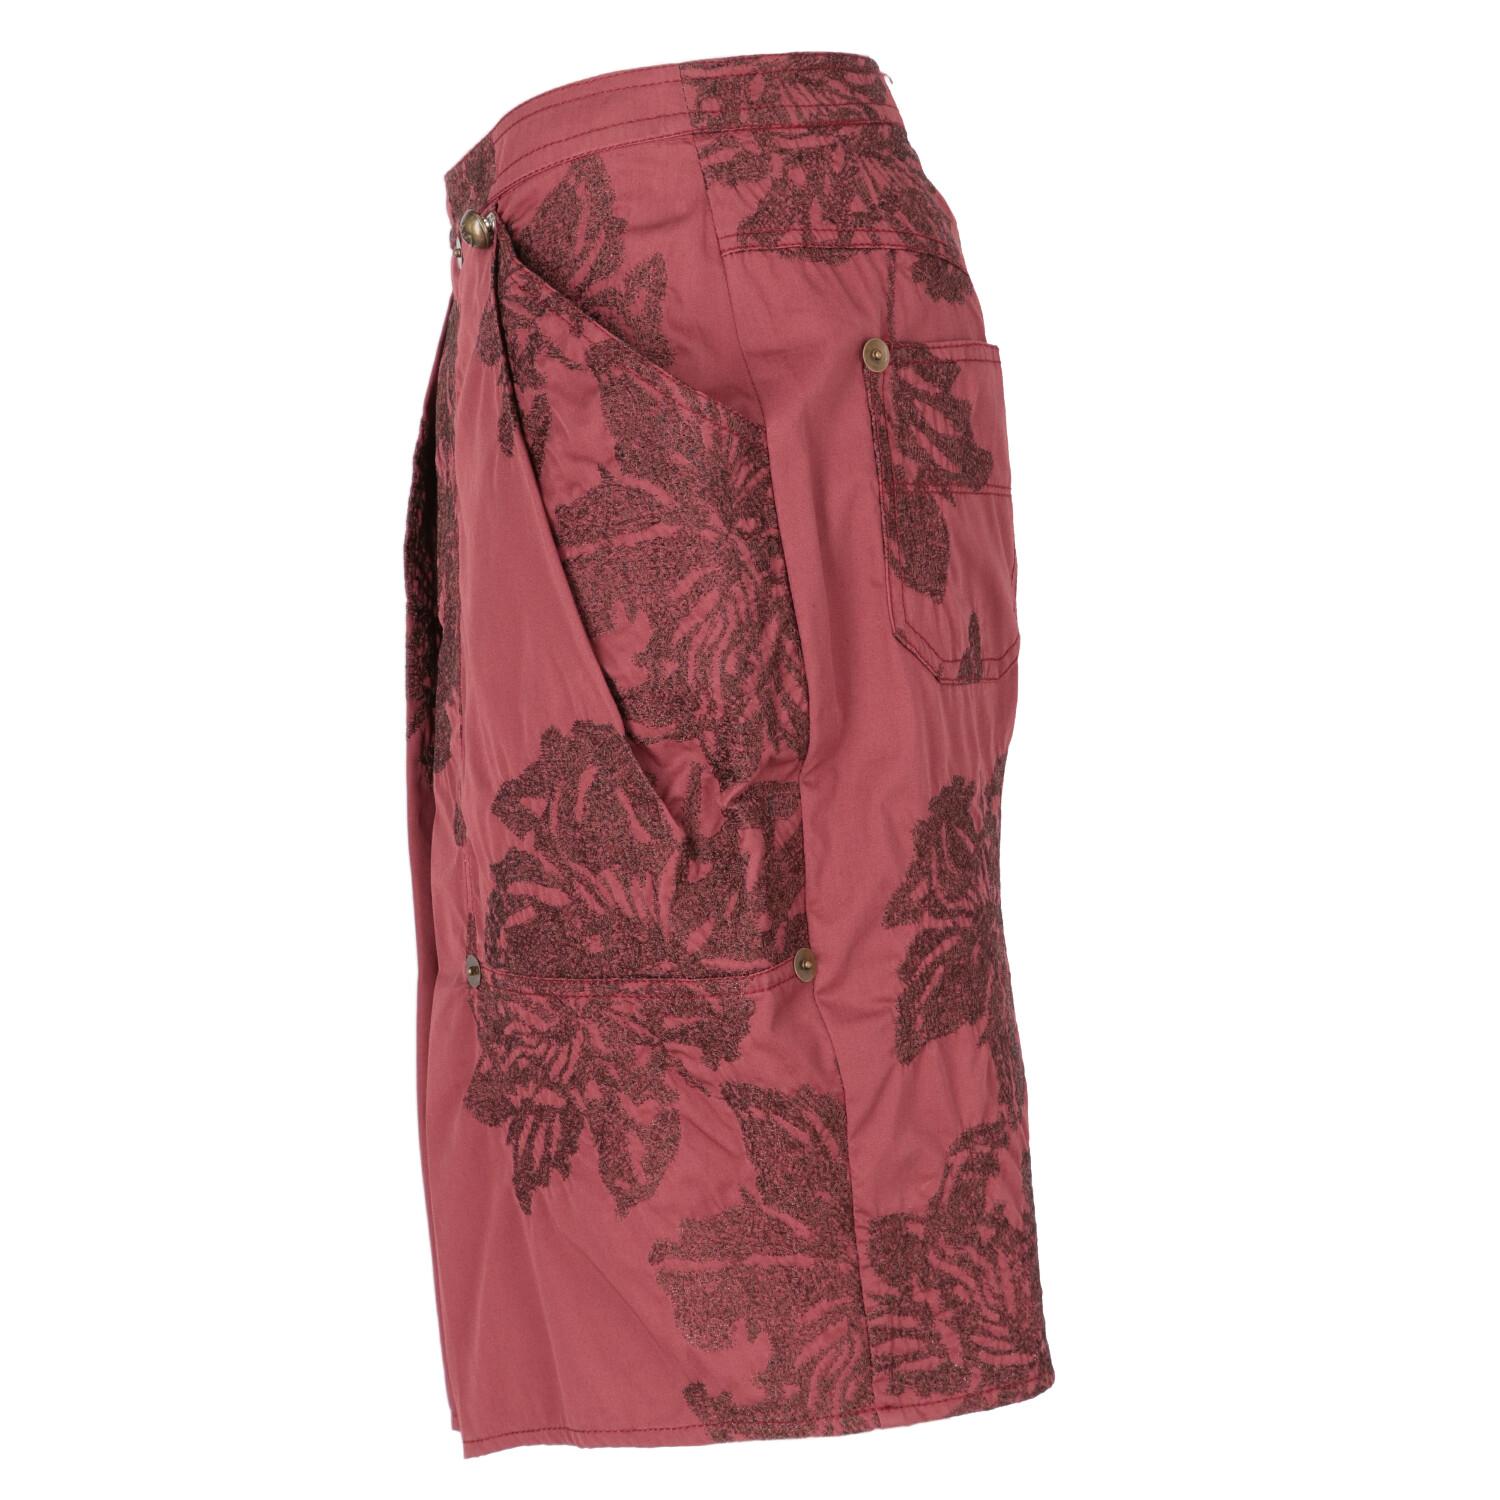 Studio 0001 By Ferré burgundy cotton skirt with tone-on-tone embroidery. Amphora model with high waist and front cannon pleat. Back closure with zip and hook.
Years: 80s

Made in Italy

Size: 44 IT

Flat measurements

Height: 55 cm
Waist: 37 cm 